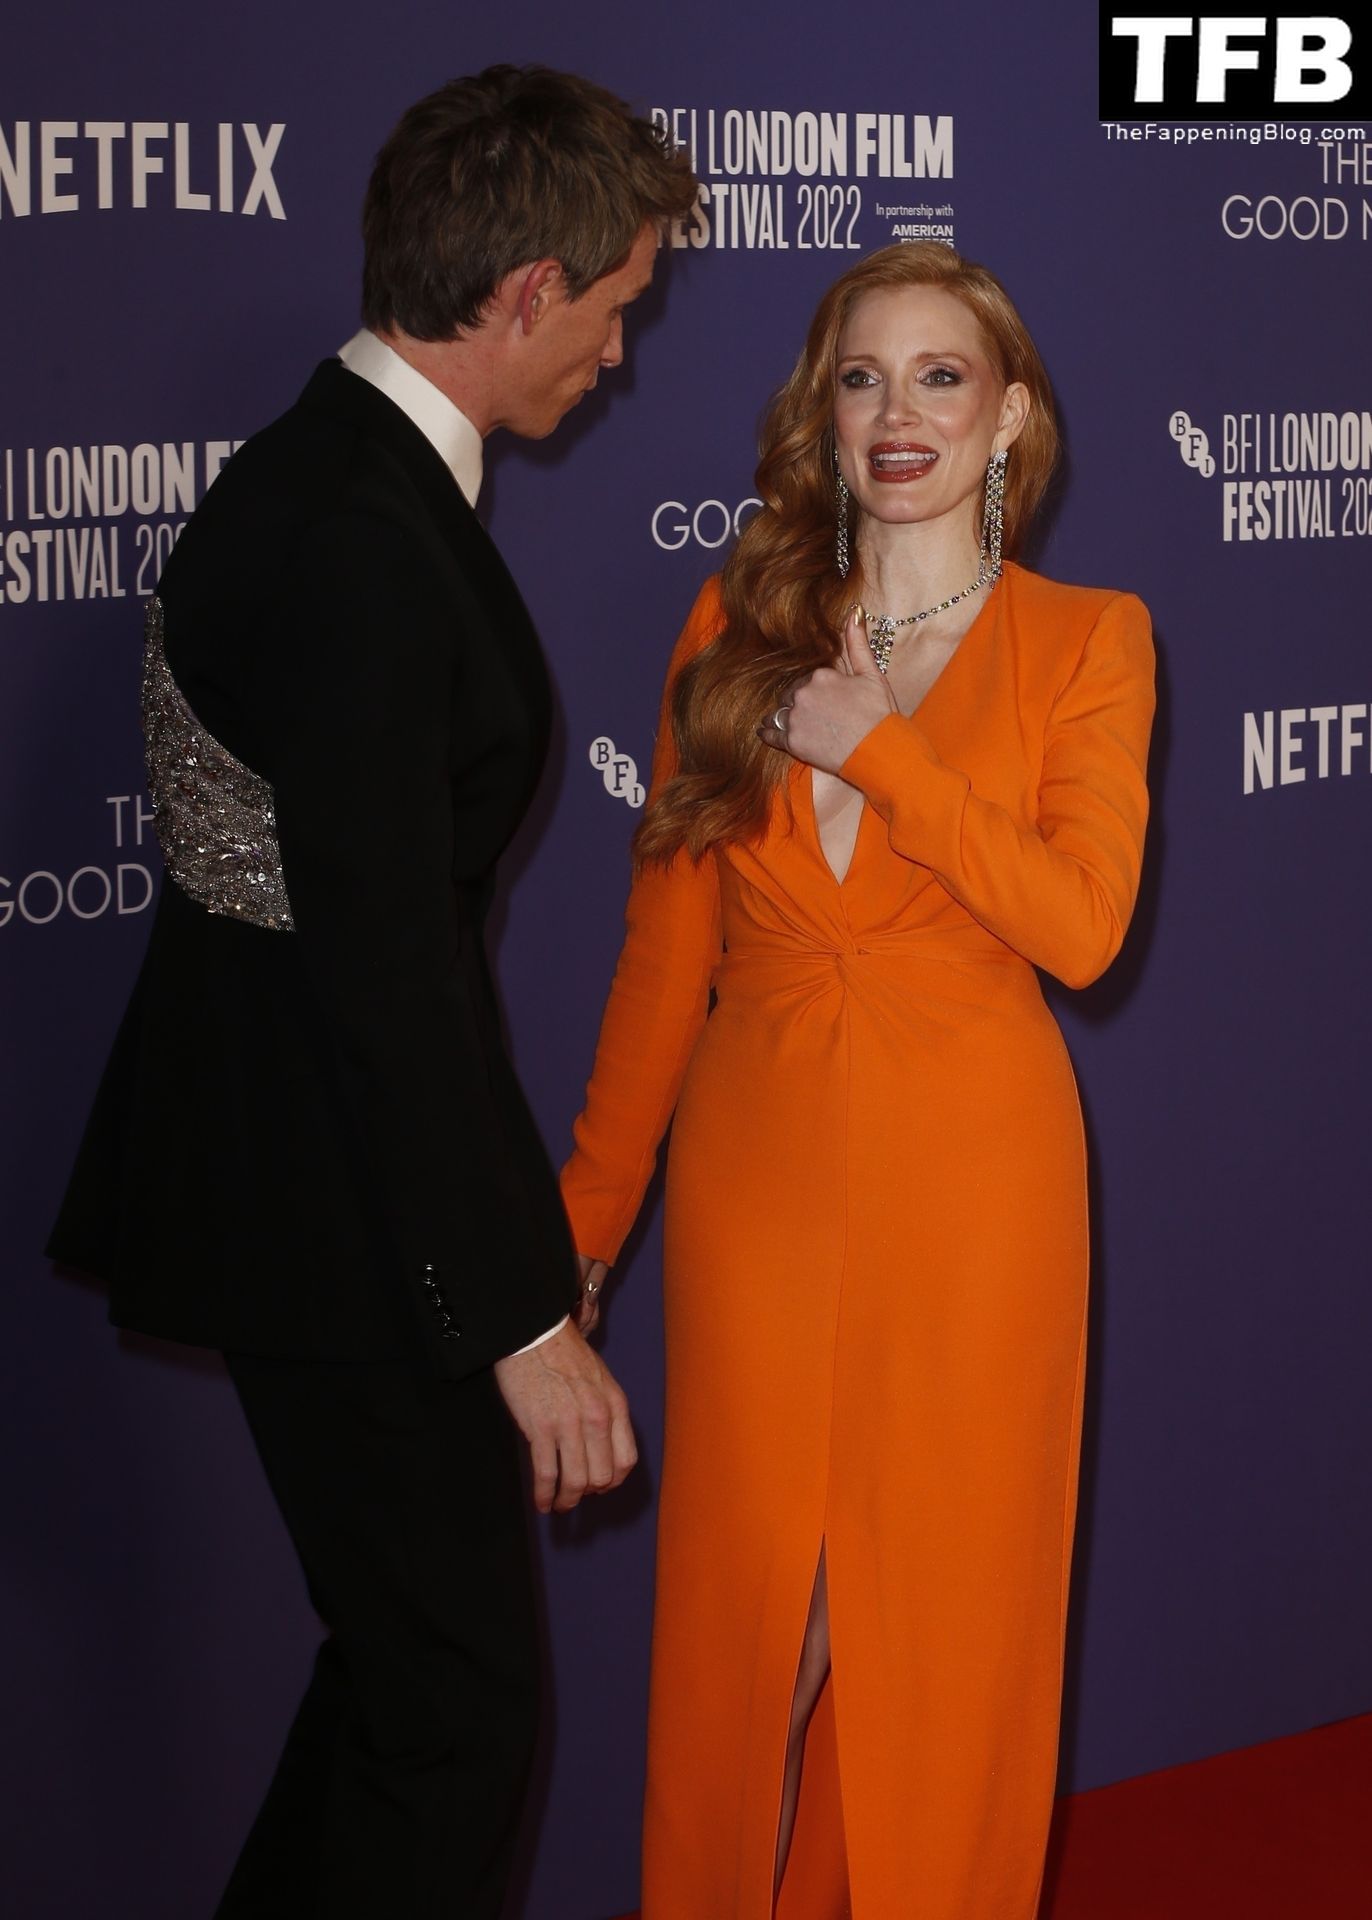 Jessica Chastain Sexy The Fappening Blog 71 - Jessica Chastain Poses for Photographers Upon Arrival for the Premiere of the Film “The Good Nurse” in London (150 Photos)